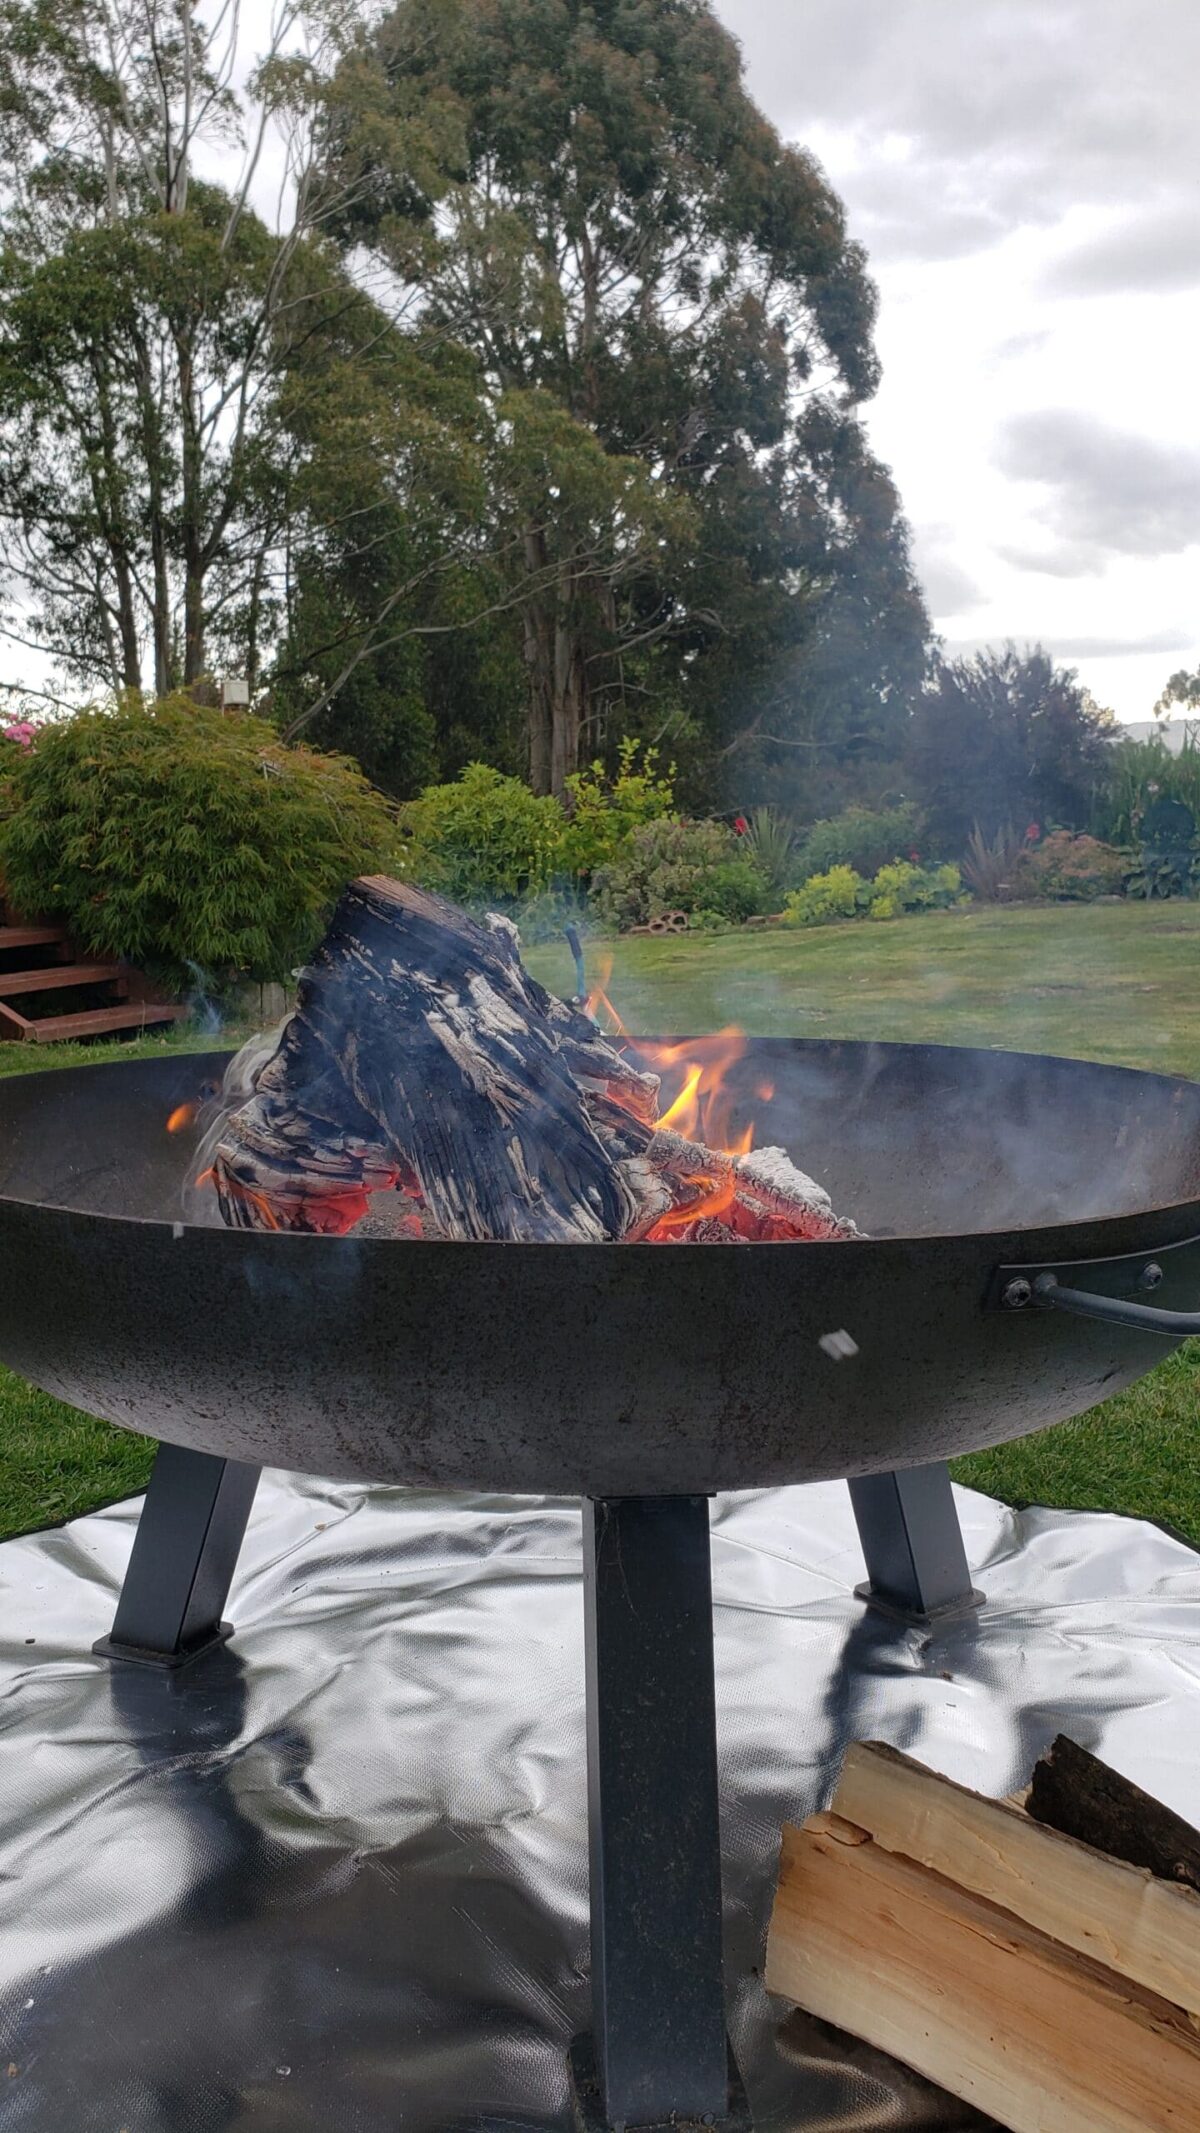 Fire Pit On Grass 5 Best Ways To, How Do You Use A Fire Pit Without Killing Grass